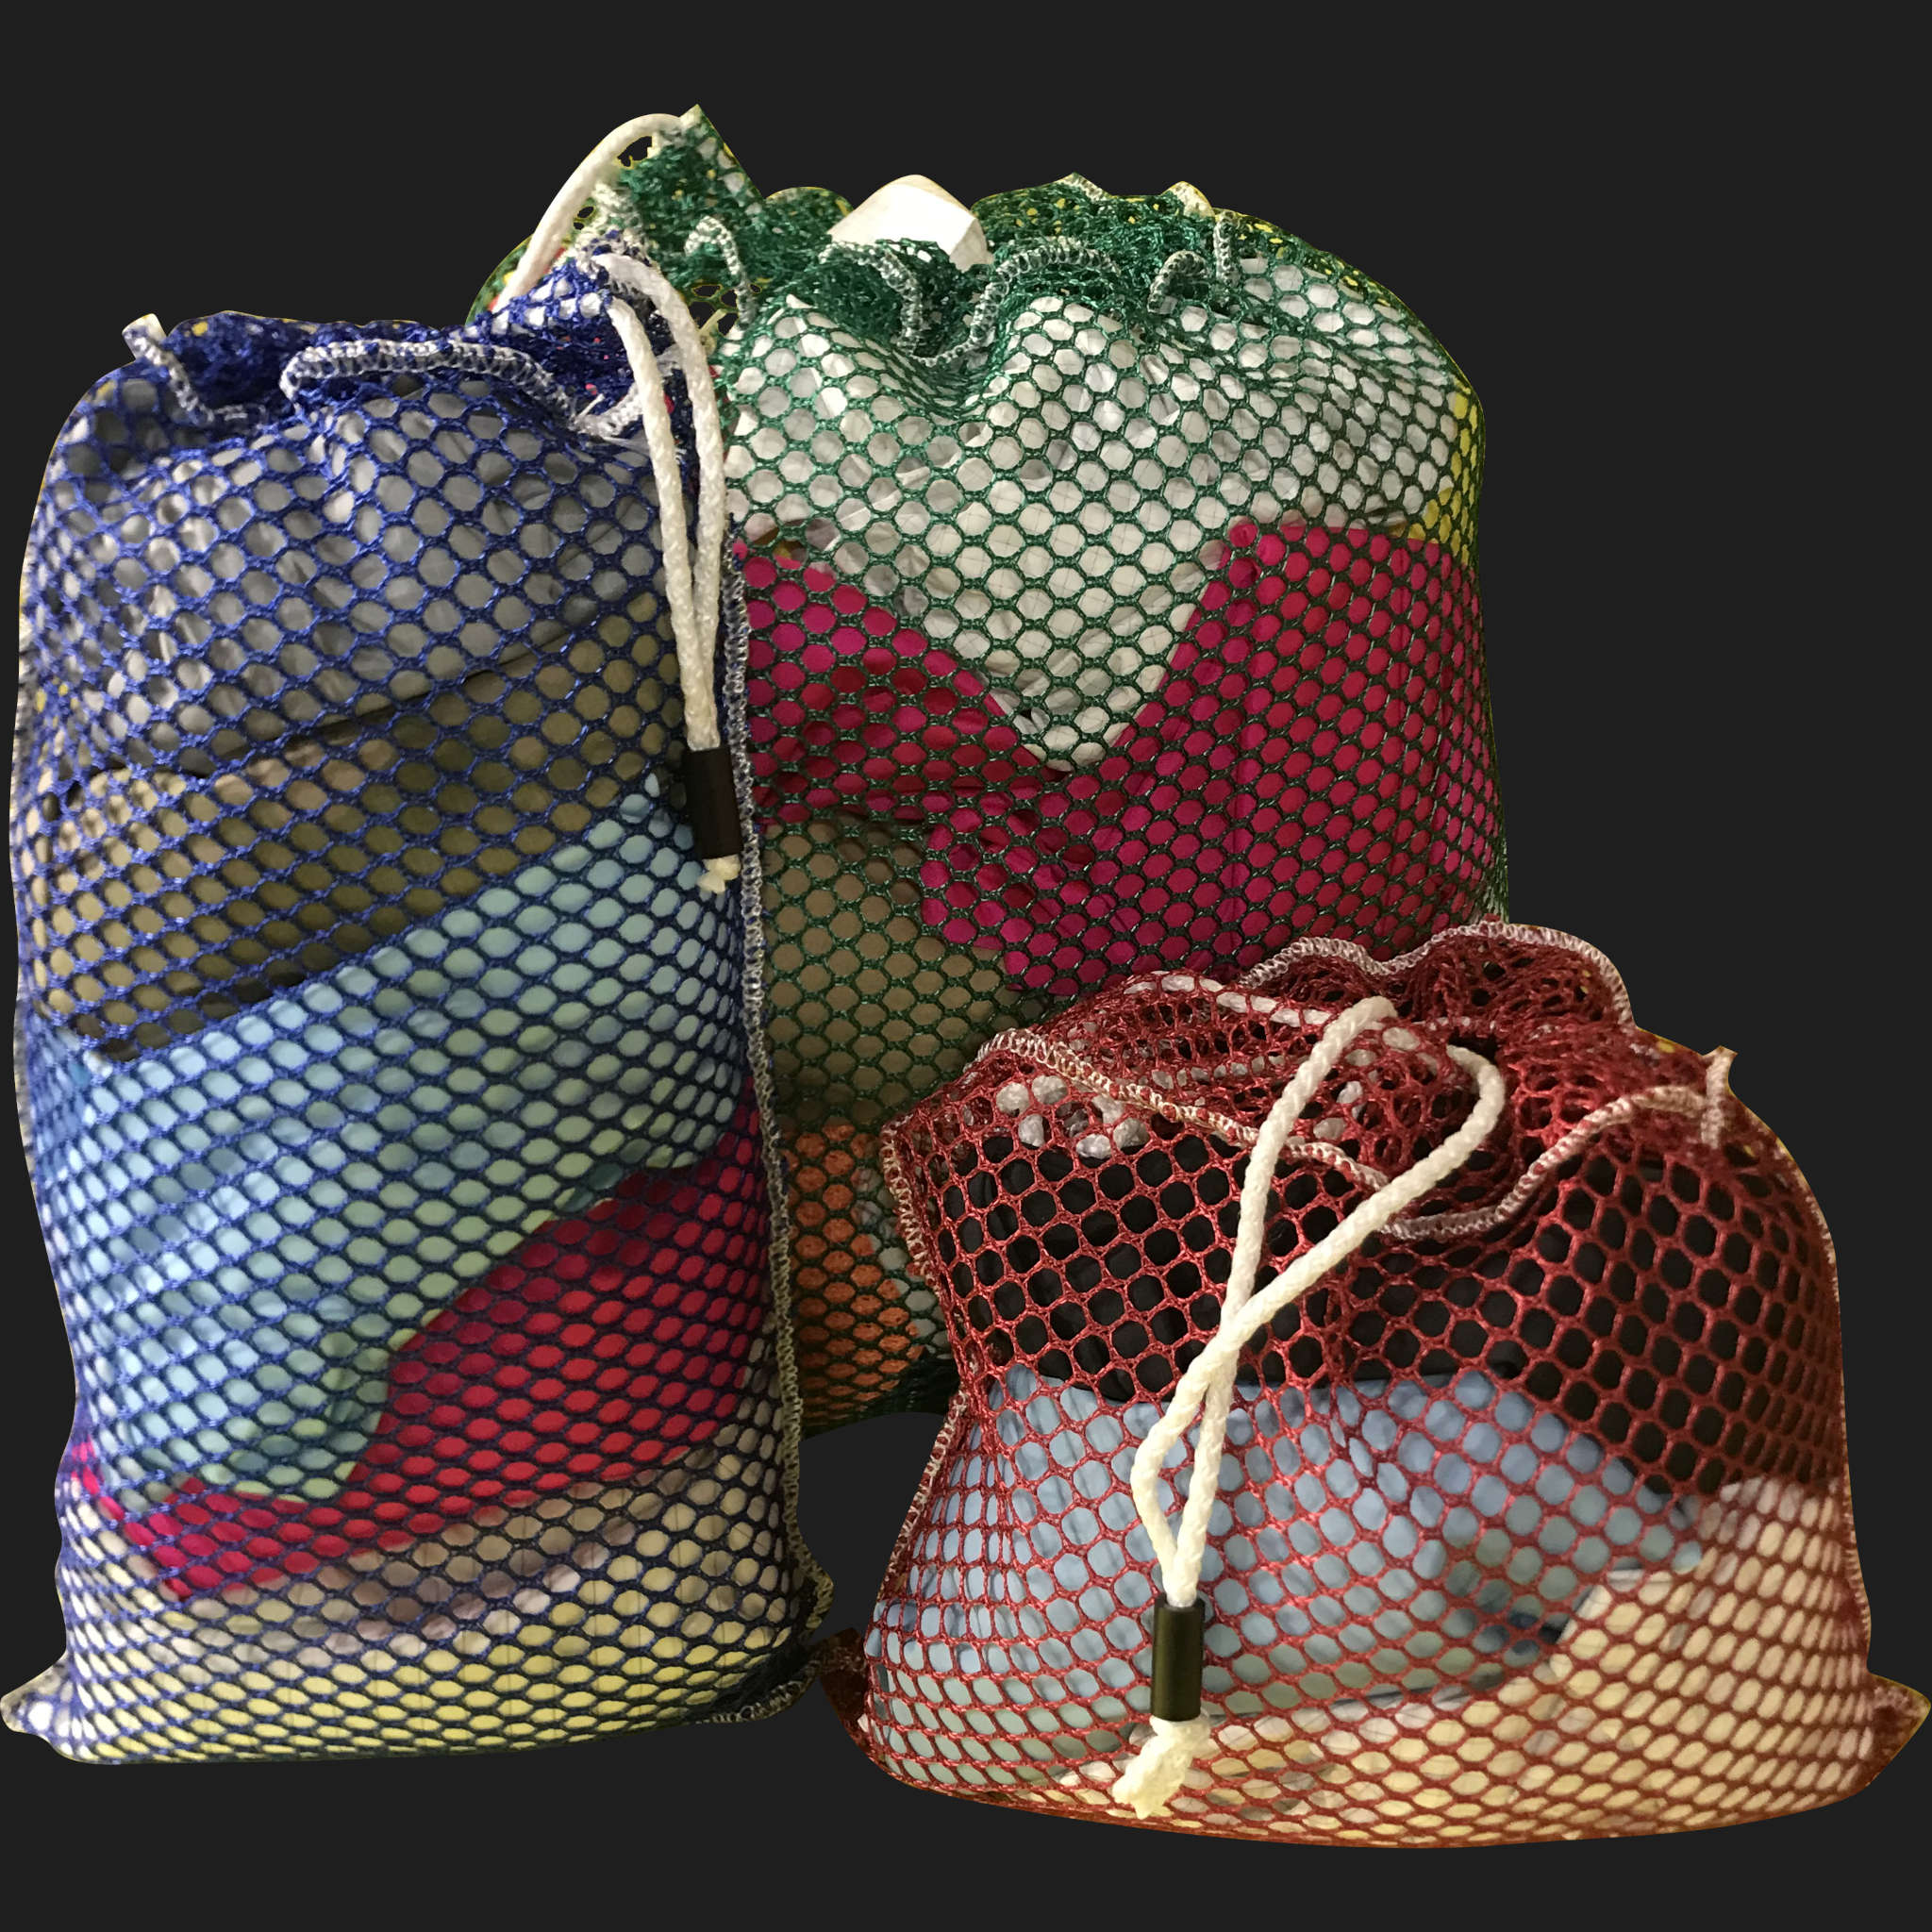 50" x 62" Customized Mesh-Net-Laundry Bags Heavy Duty with Cord and barrellock closure